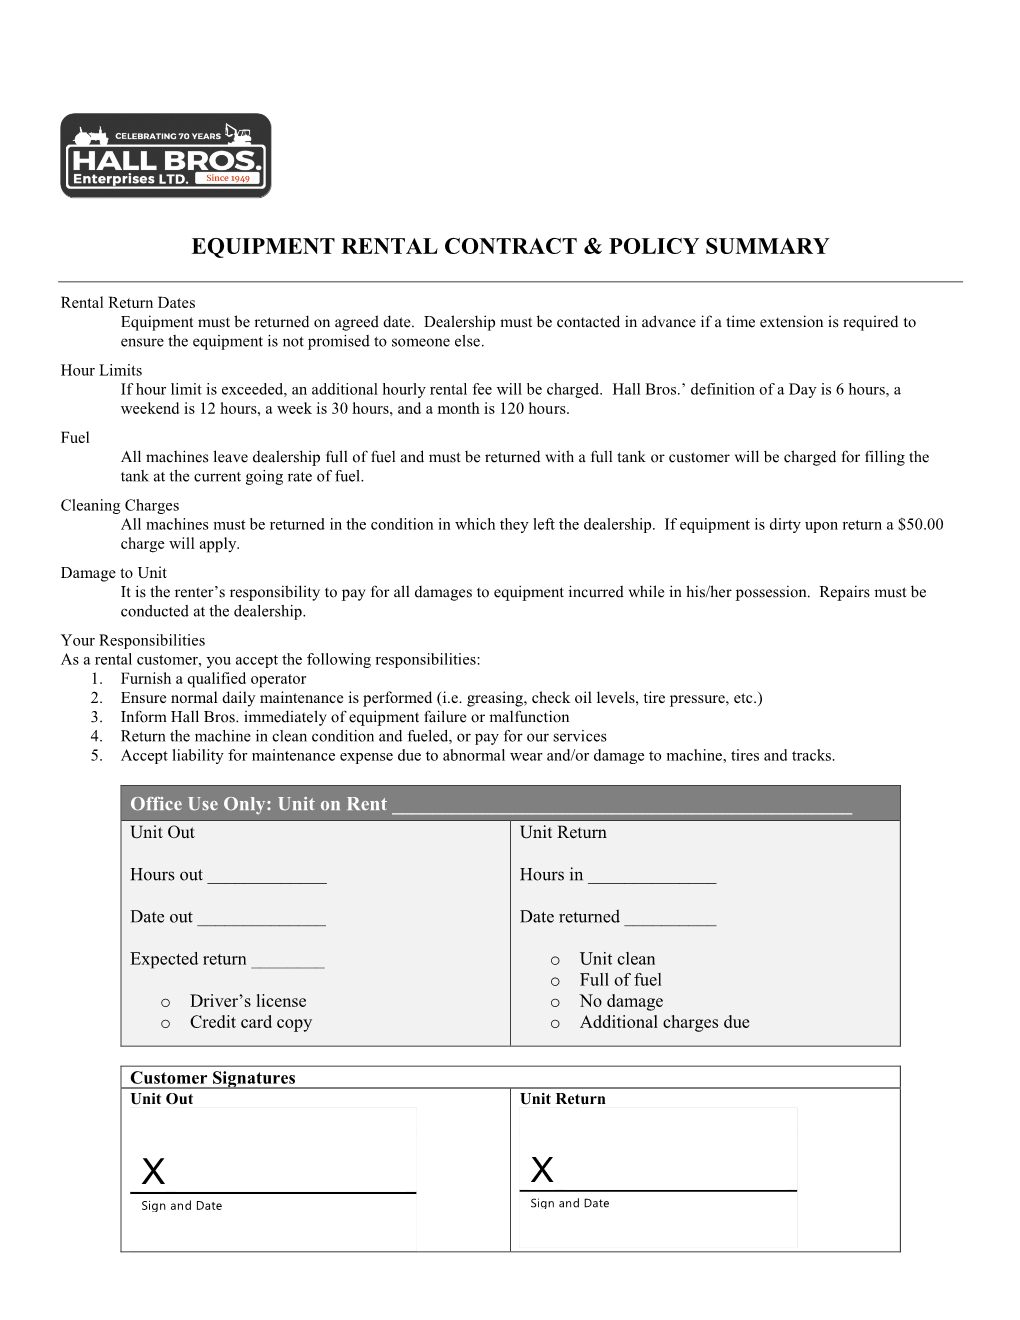 Equipment Rental Contract & Policy Summary